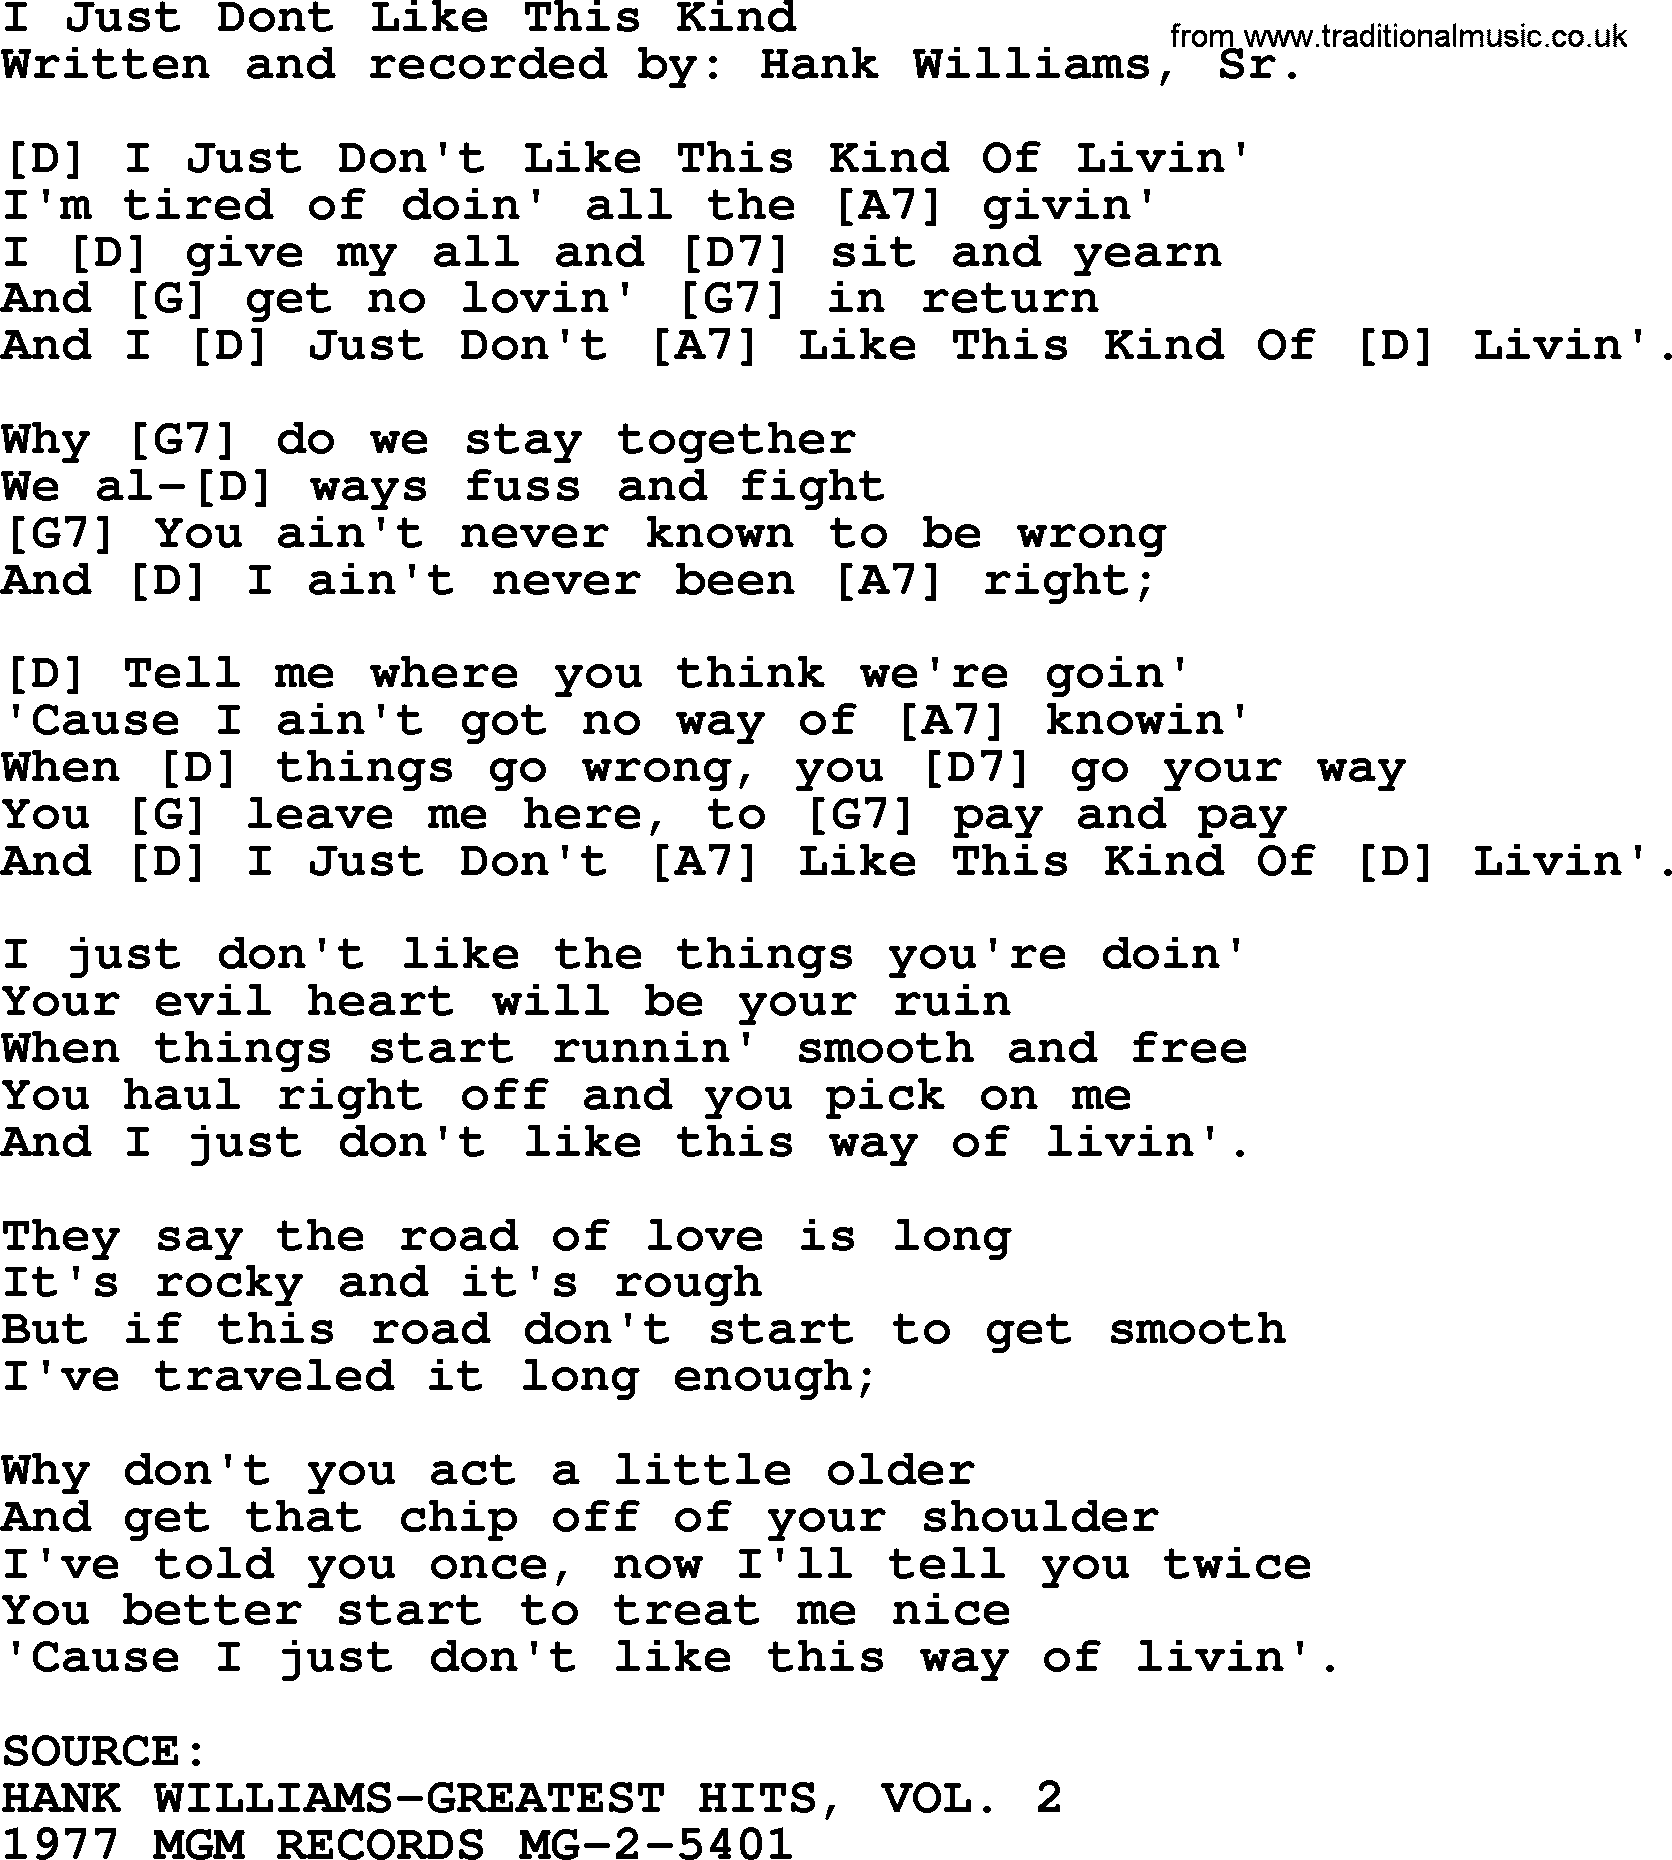 Hank Williams song I Just Dont Like This Kind, lyrics and chords